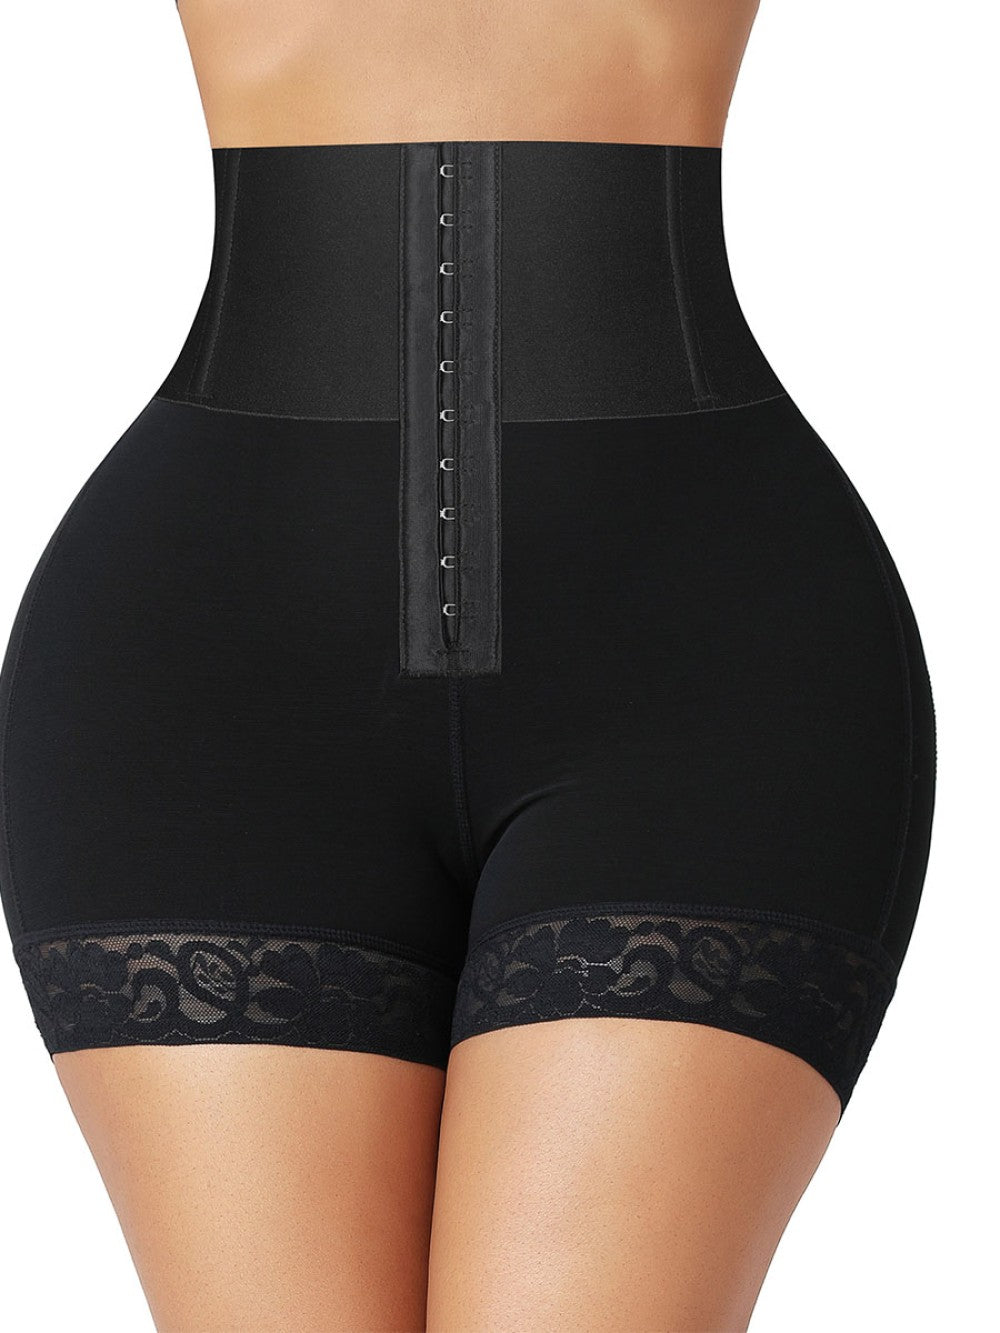 Lift your booty and snatch your waist instantly with our Booty Boosting Body  Suit - Side Zipper. This shaper provides firm compression in…